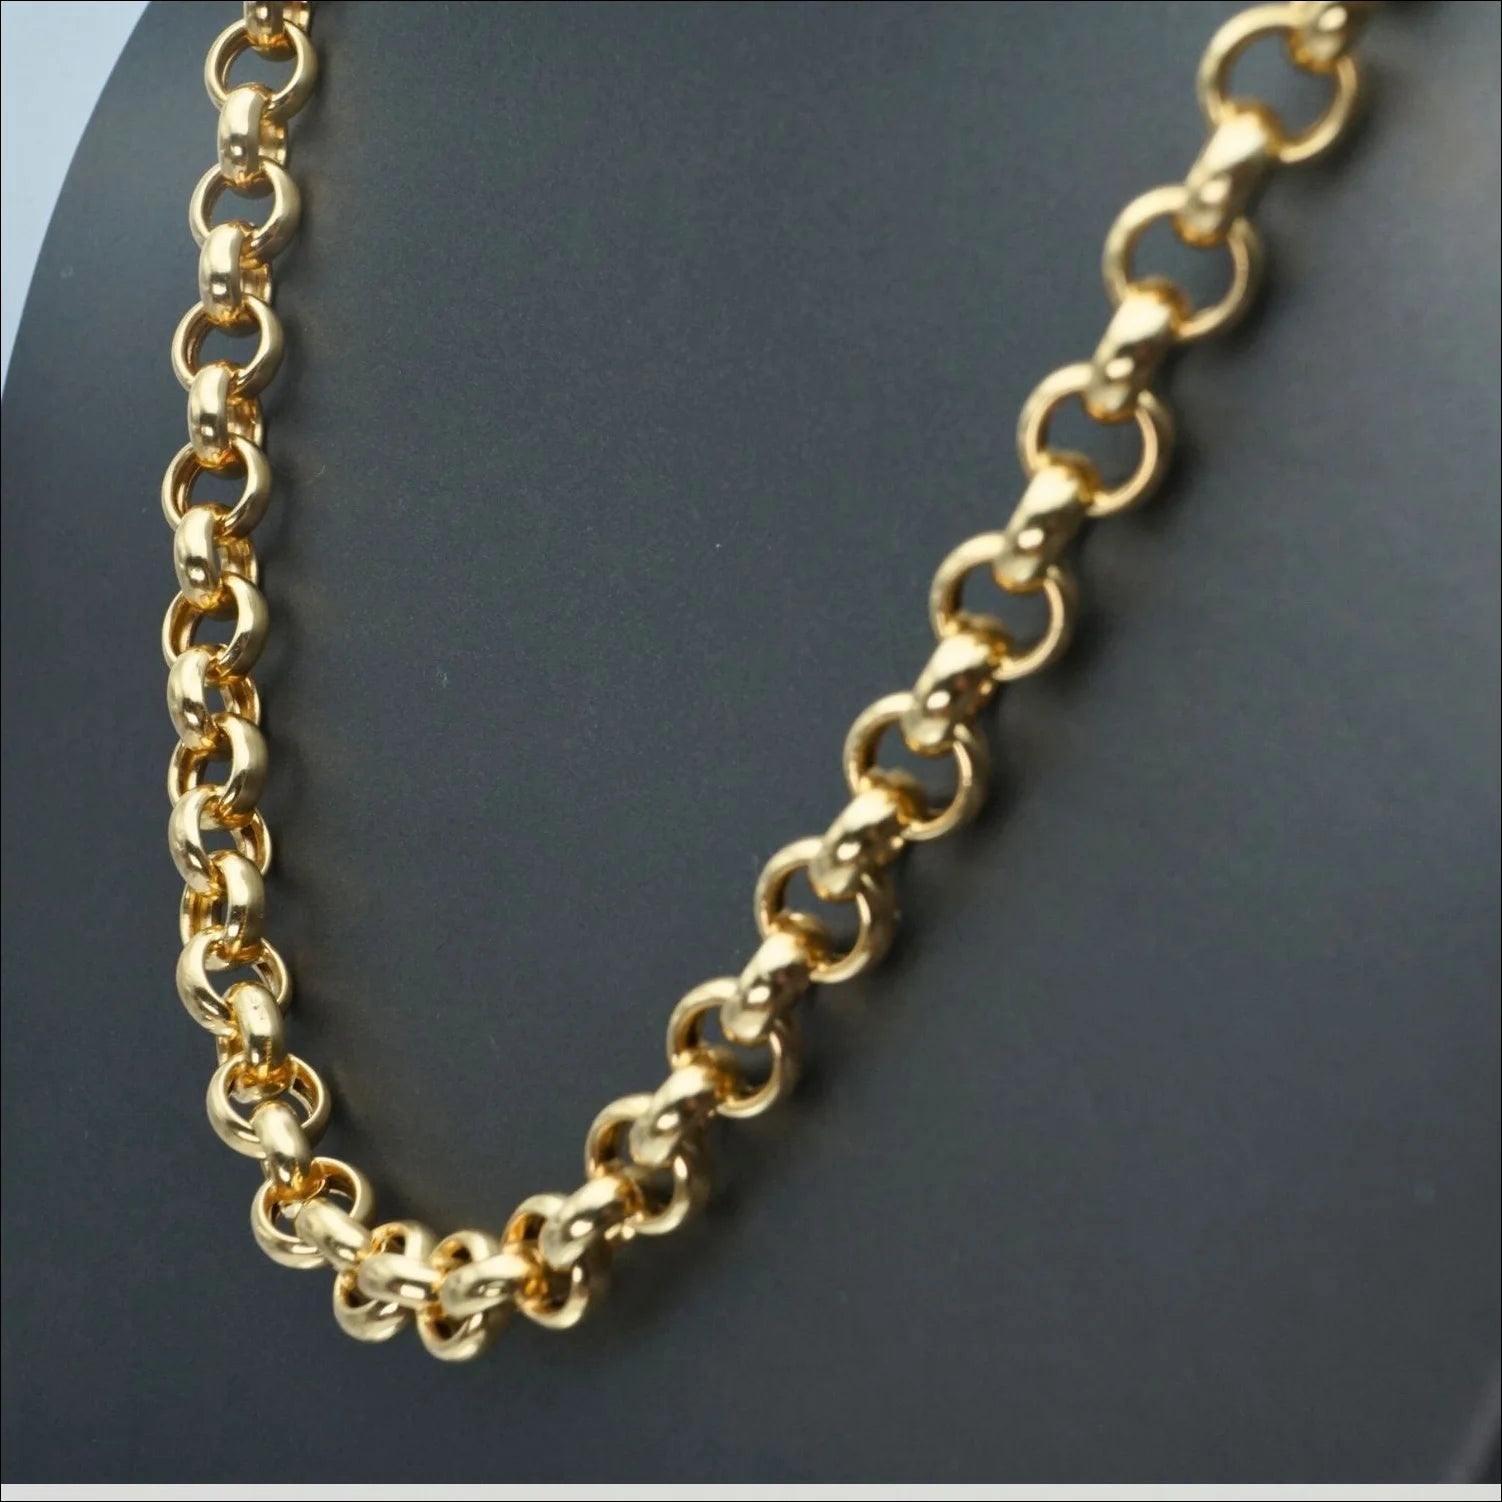 ’Exquisite 18k Gold Chain - Art Gold Jewelry’ | Above $1000